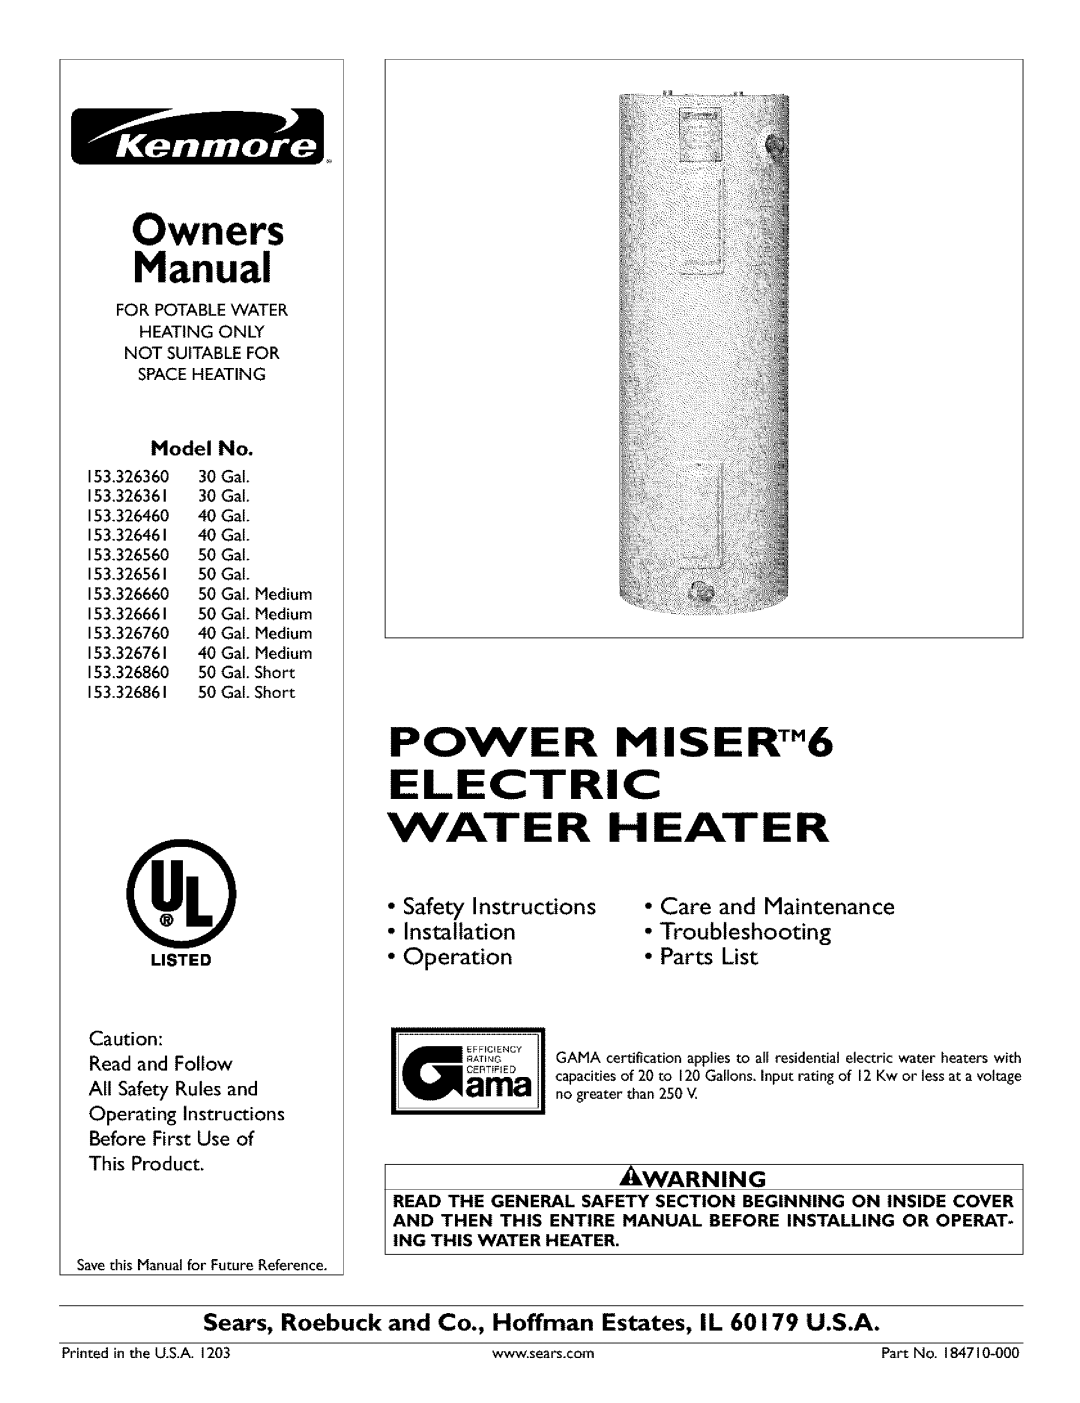 Kenmore 153.326561, 153.326761, 153.32686, 153.326361 owner manual POWER MISERTM6 ELECTRIC WATER HEATER, Installation 